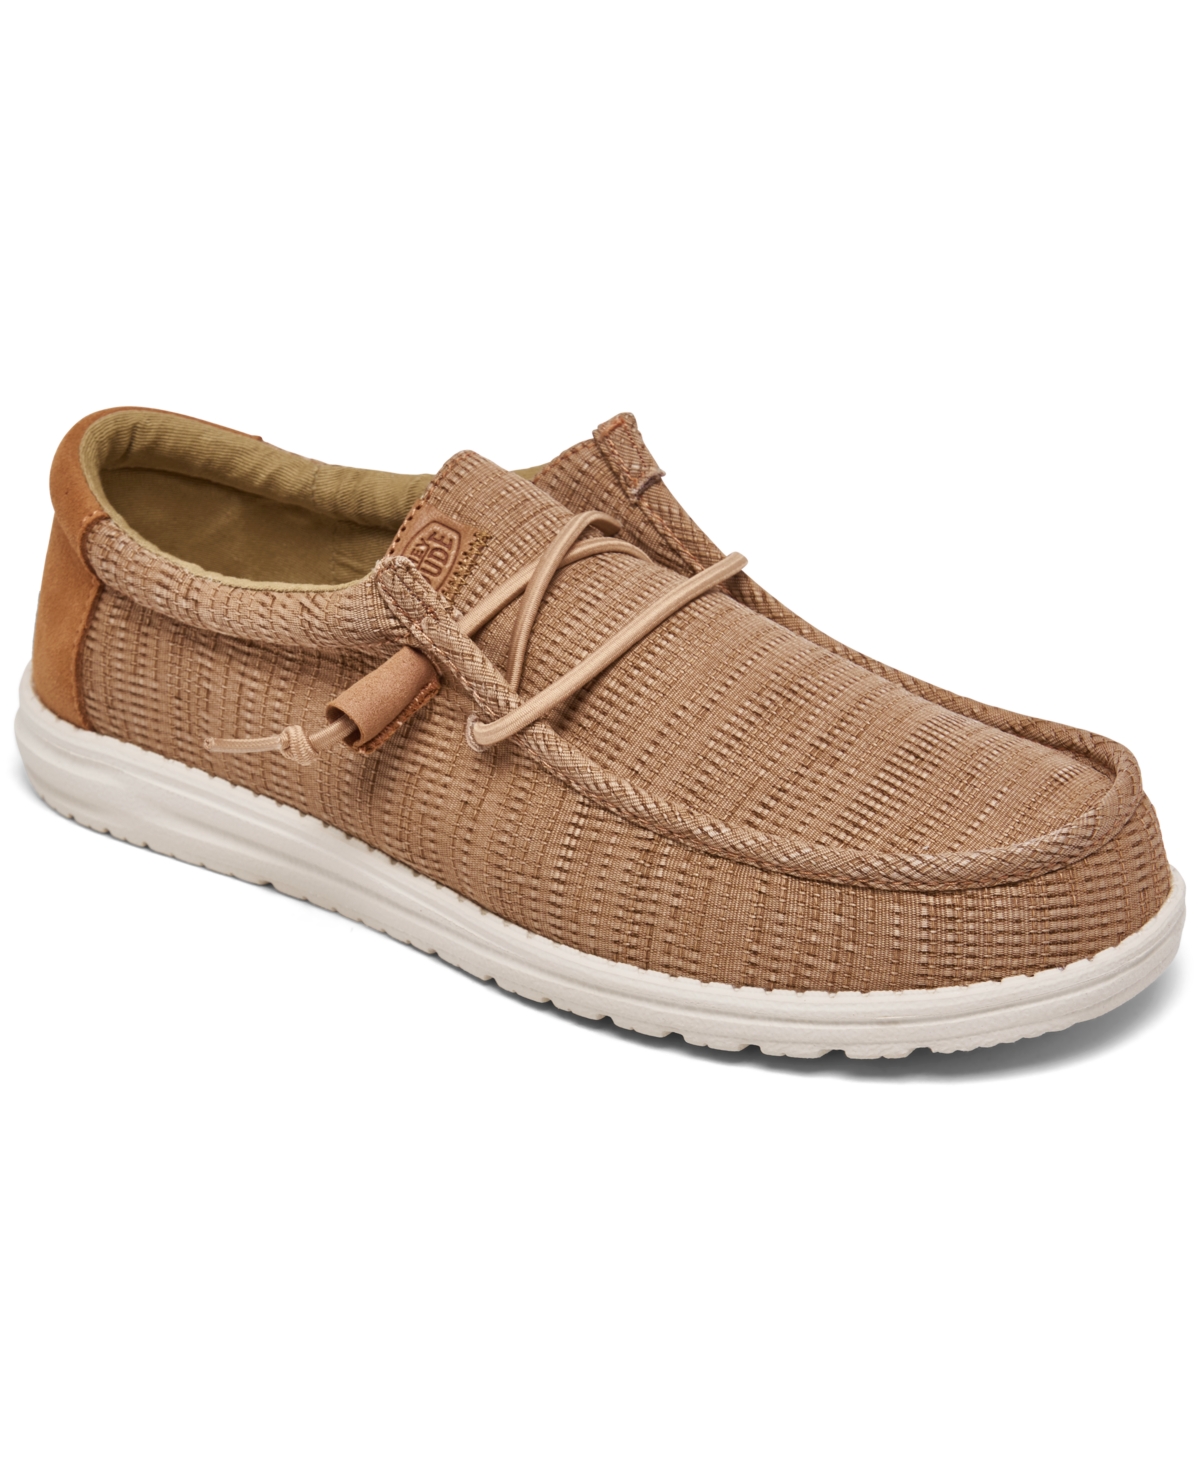 Men's Wally Grid Casual Moccasin Slip-On Sneakers from Finish Line - Tan